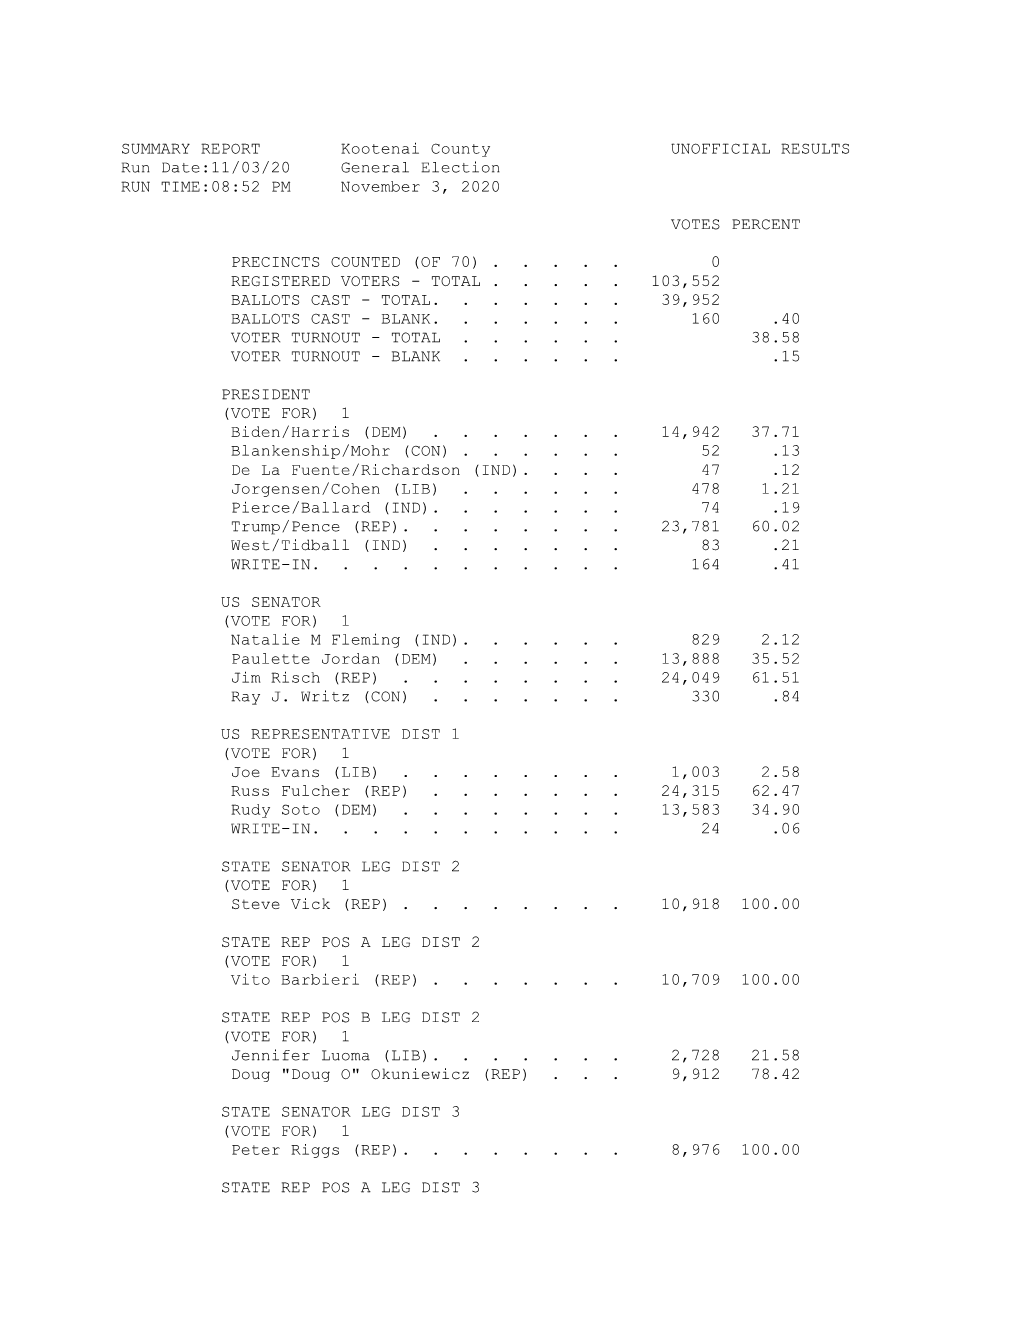 SUMMARY REPORT Kootenai County UNOFFICIAL RESULTS Run Date:11/03/20 General Election RUN TIME:08:52 PM November 3, 2020